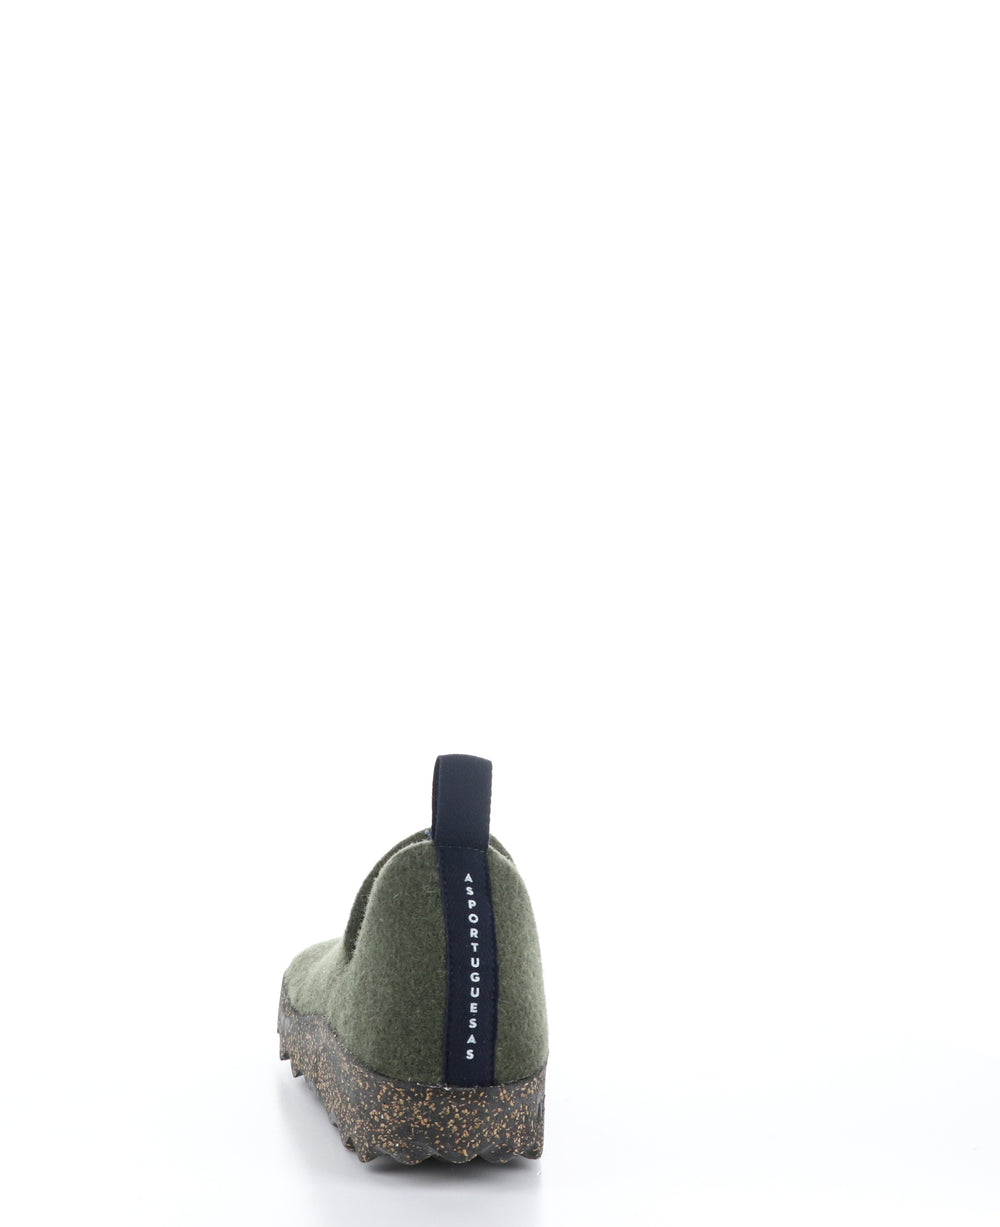 CITY Military Green Round Toe Shoes|CITY Chaussures à Bout Rond in Vert